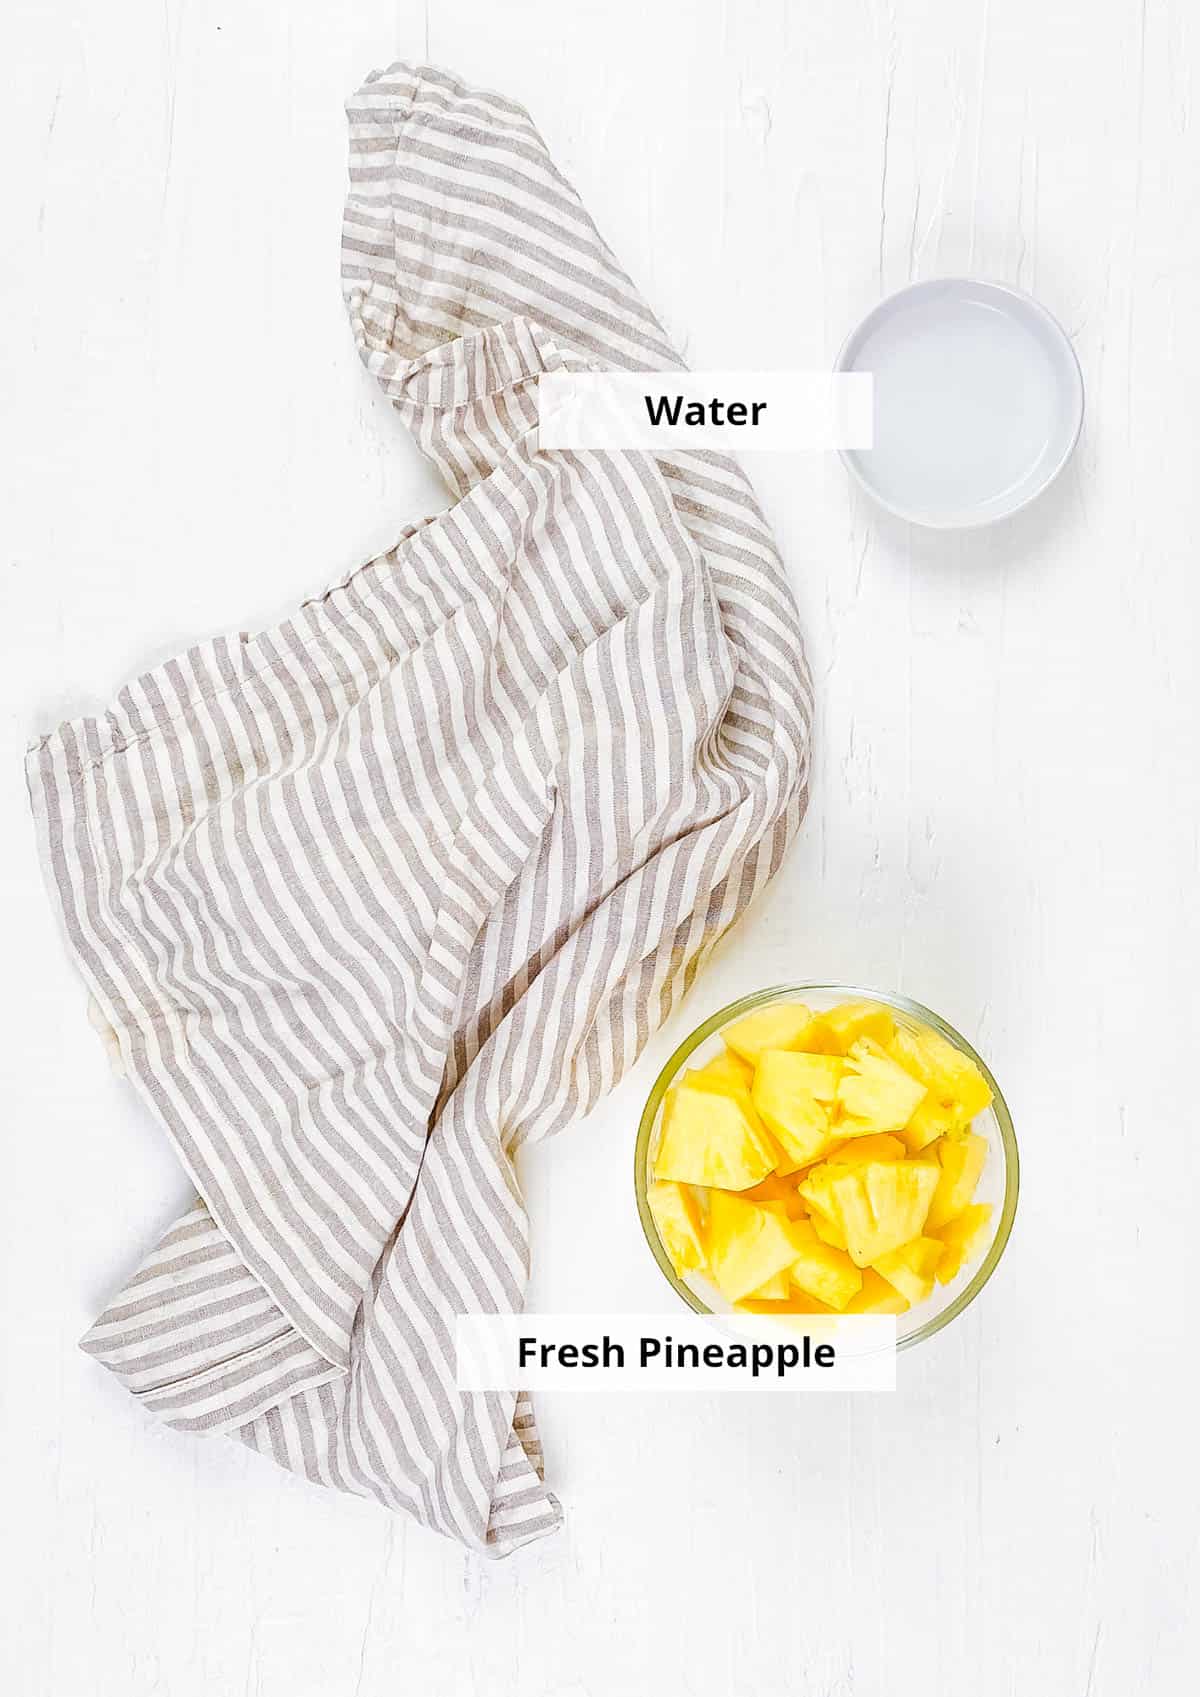 Ingredients for pineapple puree on a white background.